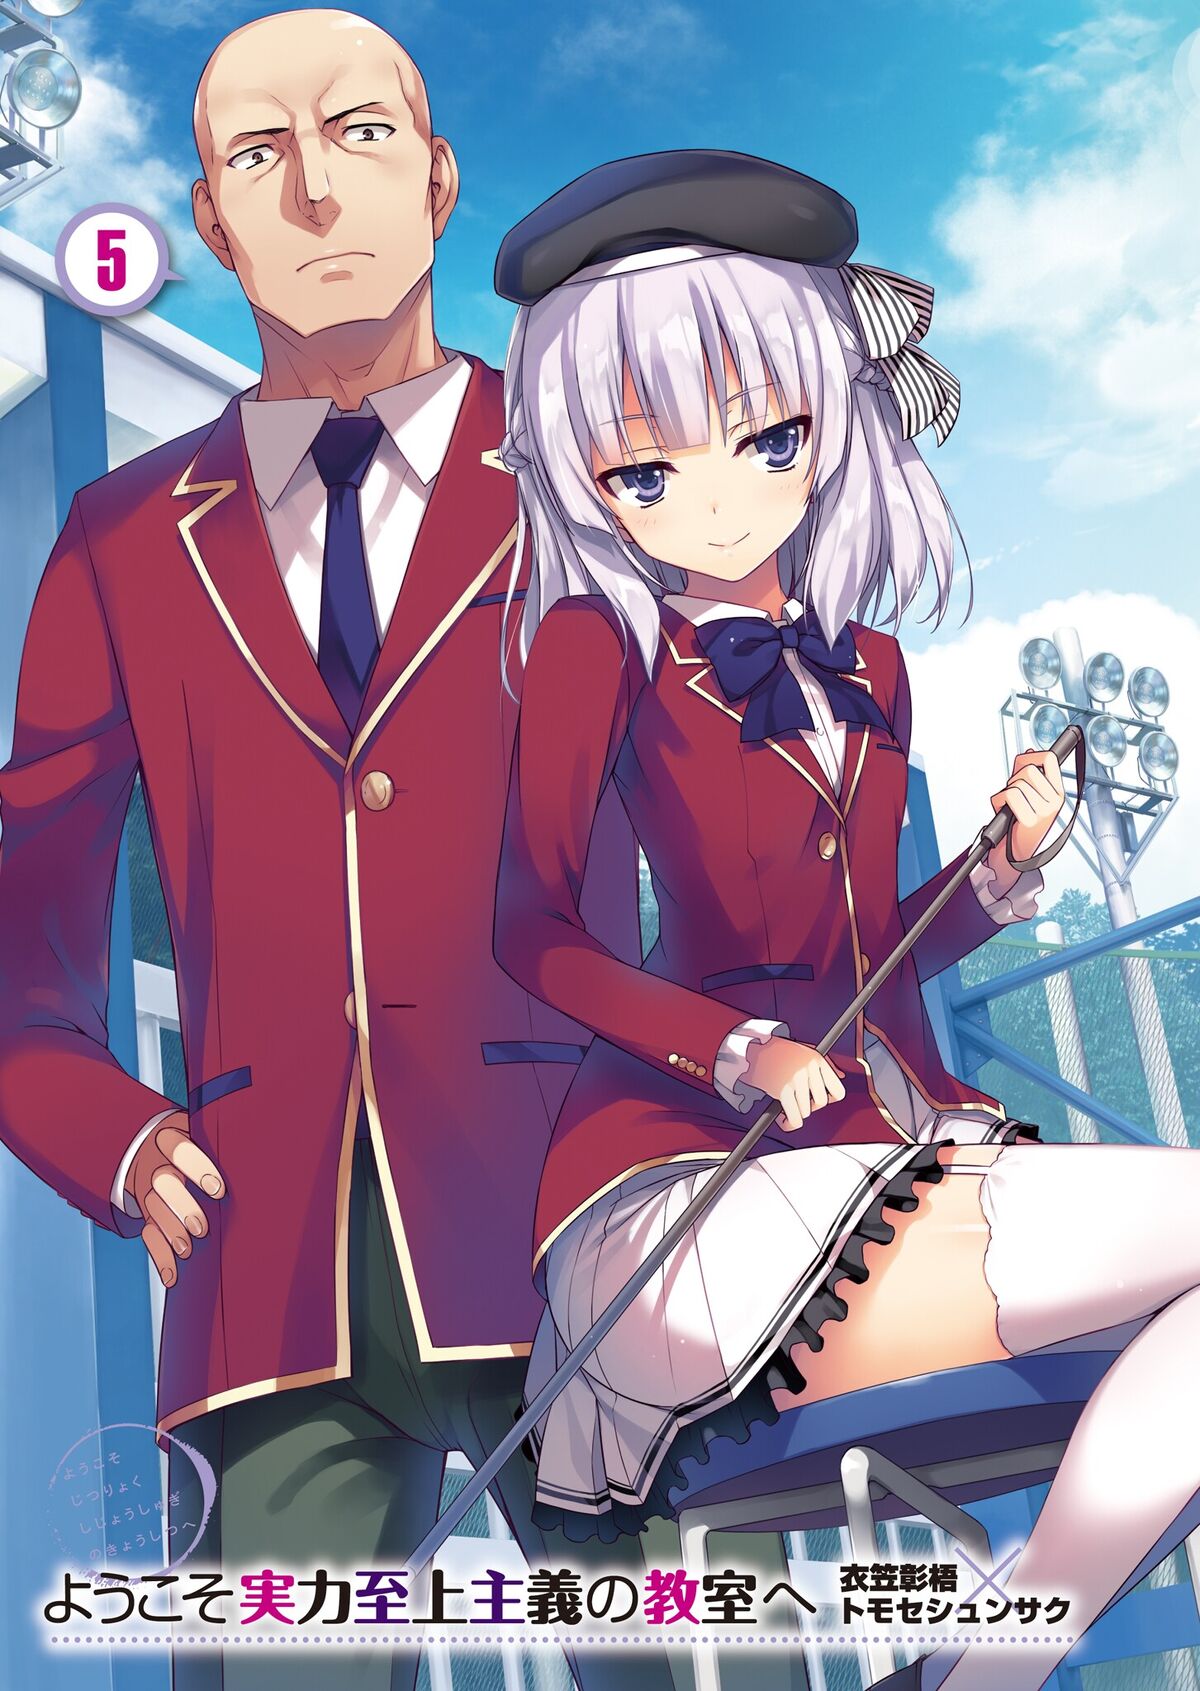 Classroom Of The Elite : Volume 9 (Chapter 1) - The Student Council  President's Intentions - OH! Press